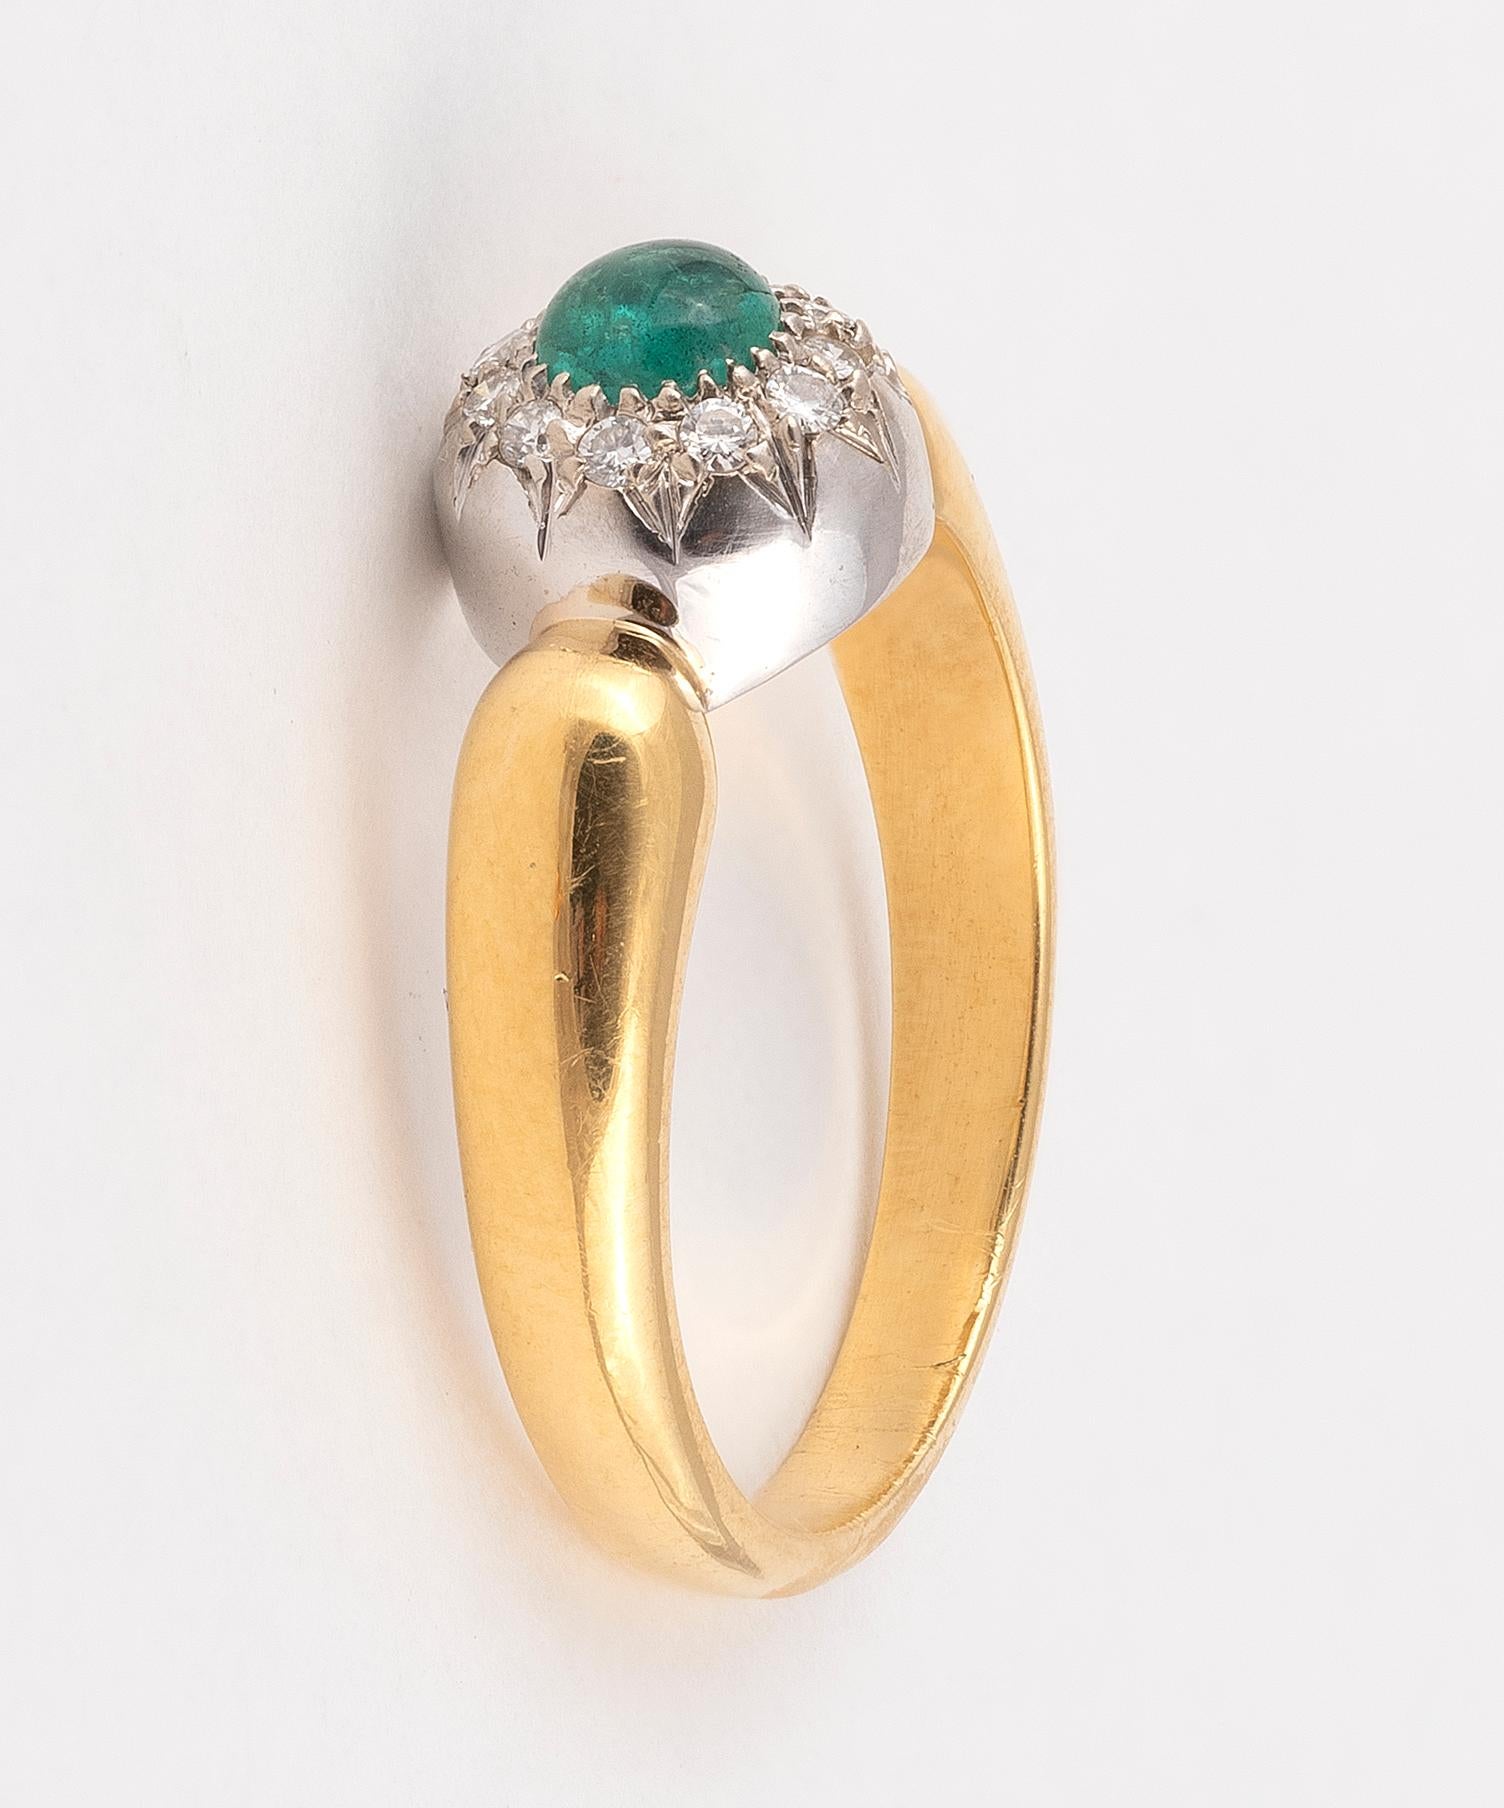 

Cabochon emerald and diamond cluster ring
Size: 7